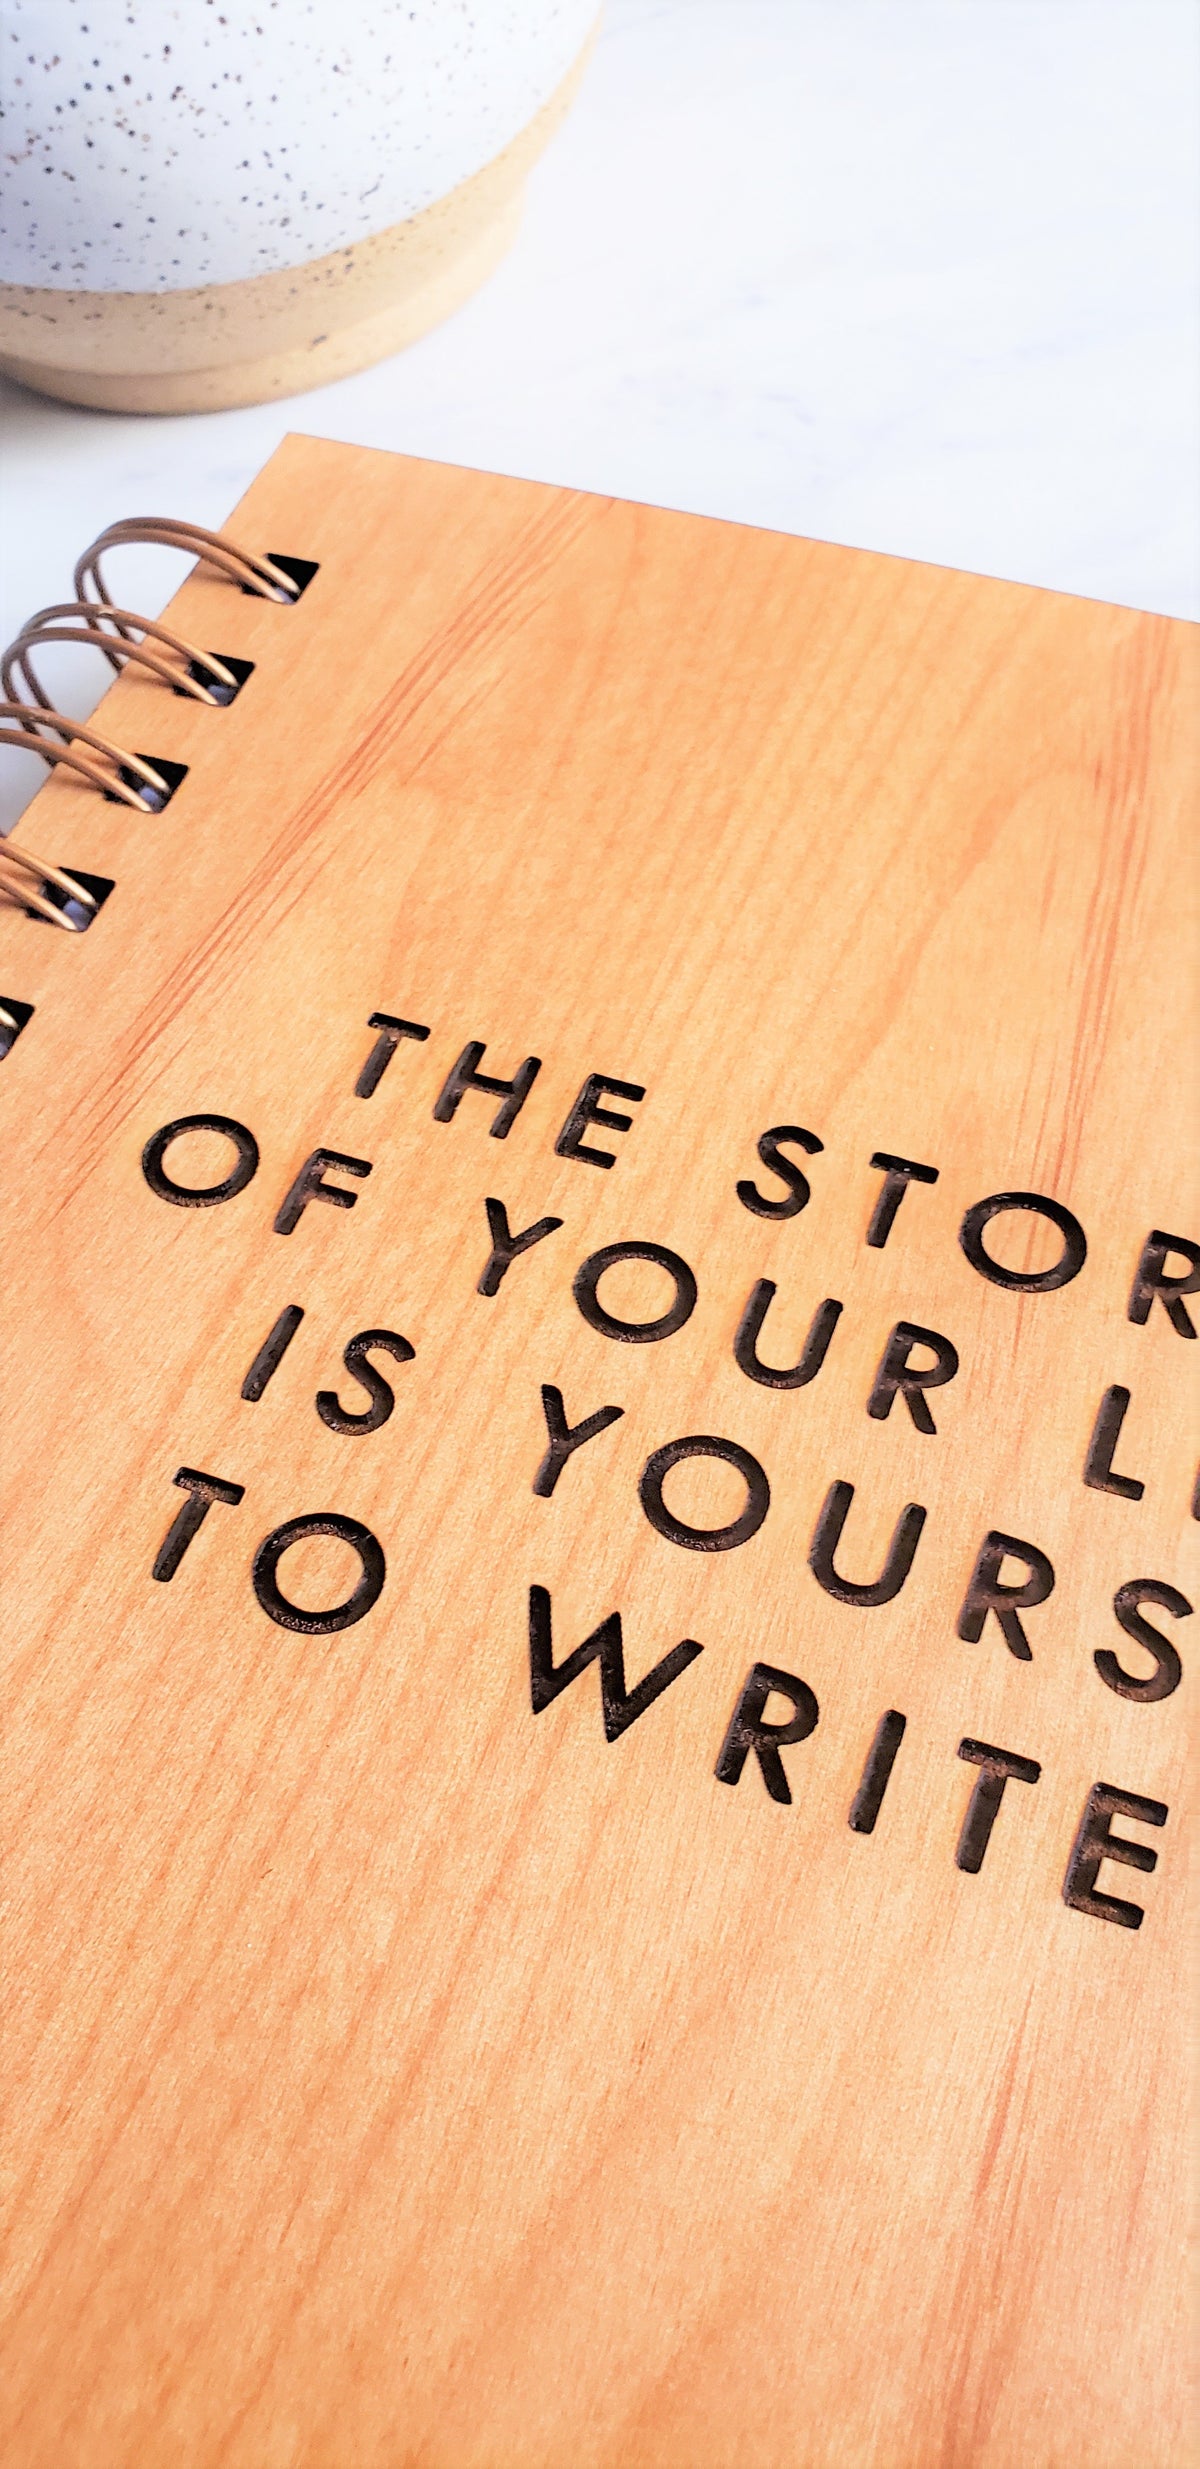 Journal - The Story of Your Life is Yours to Write